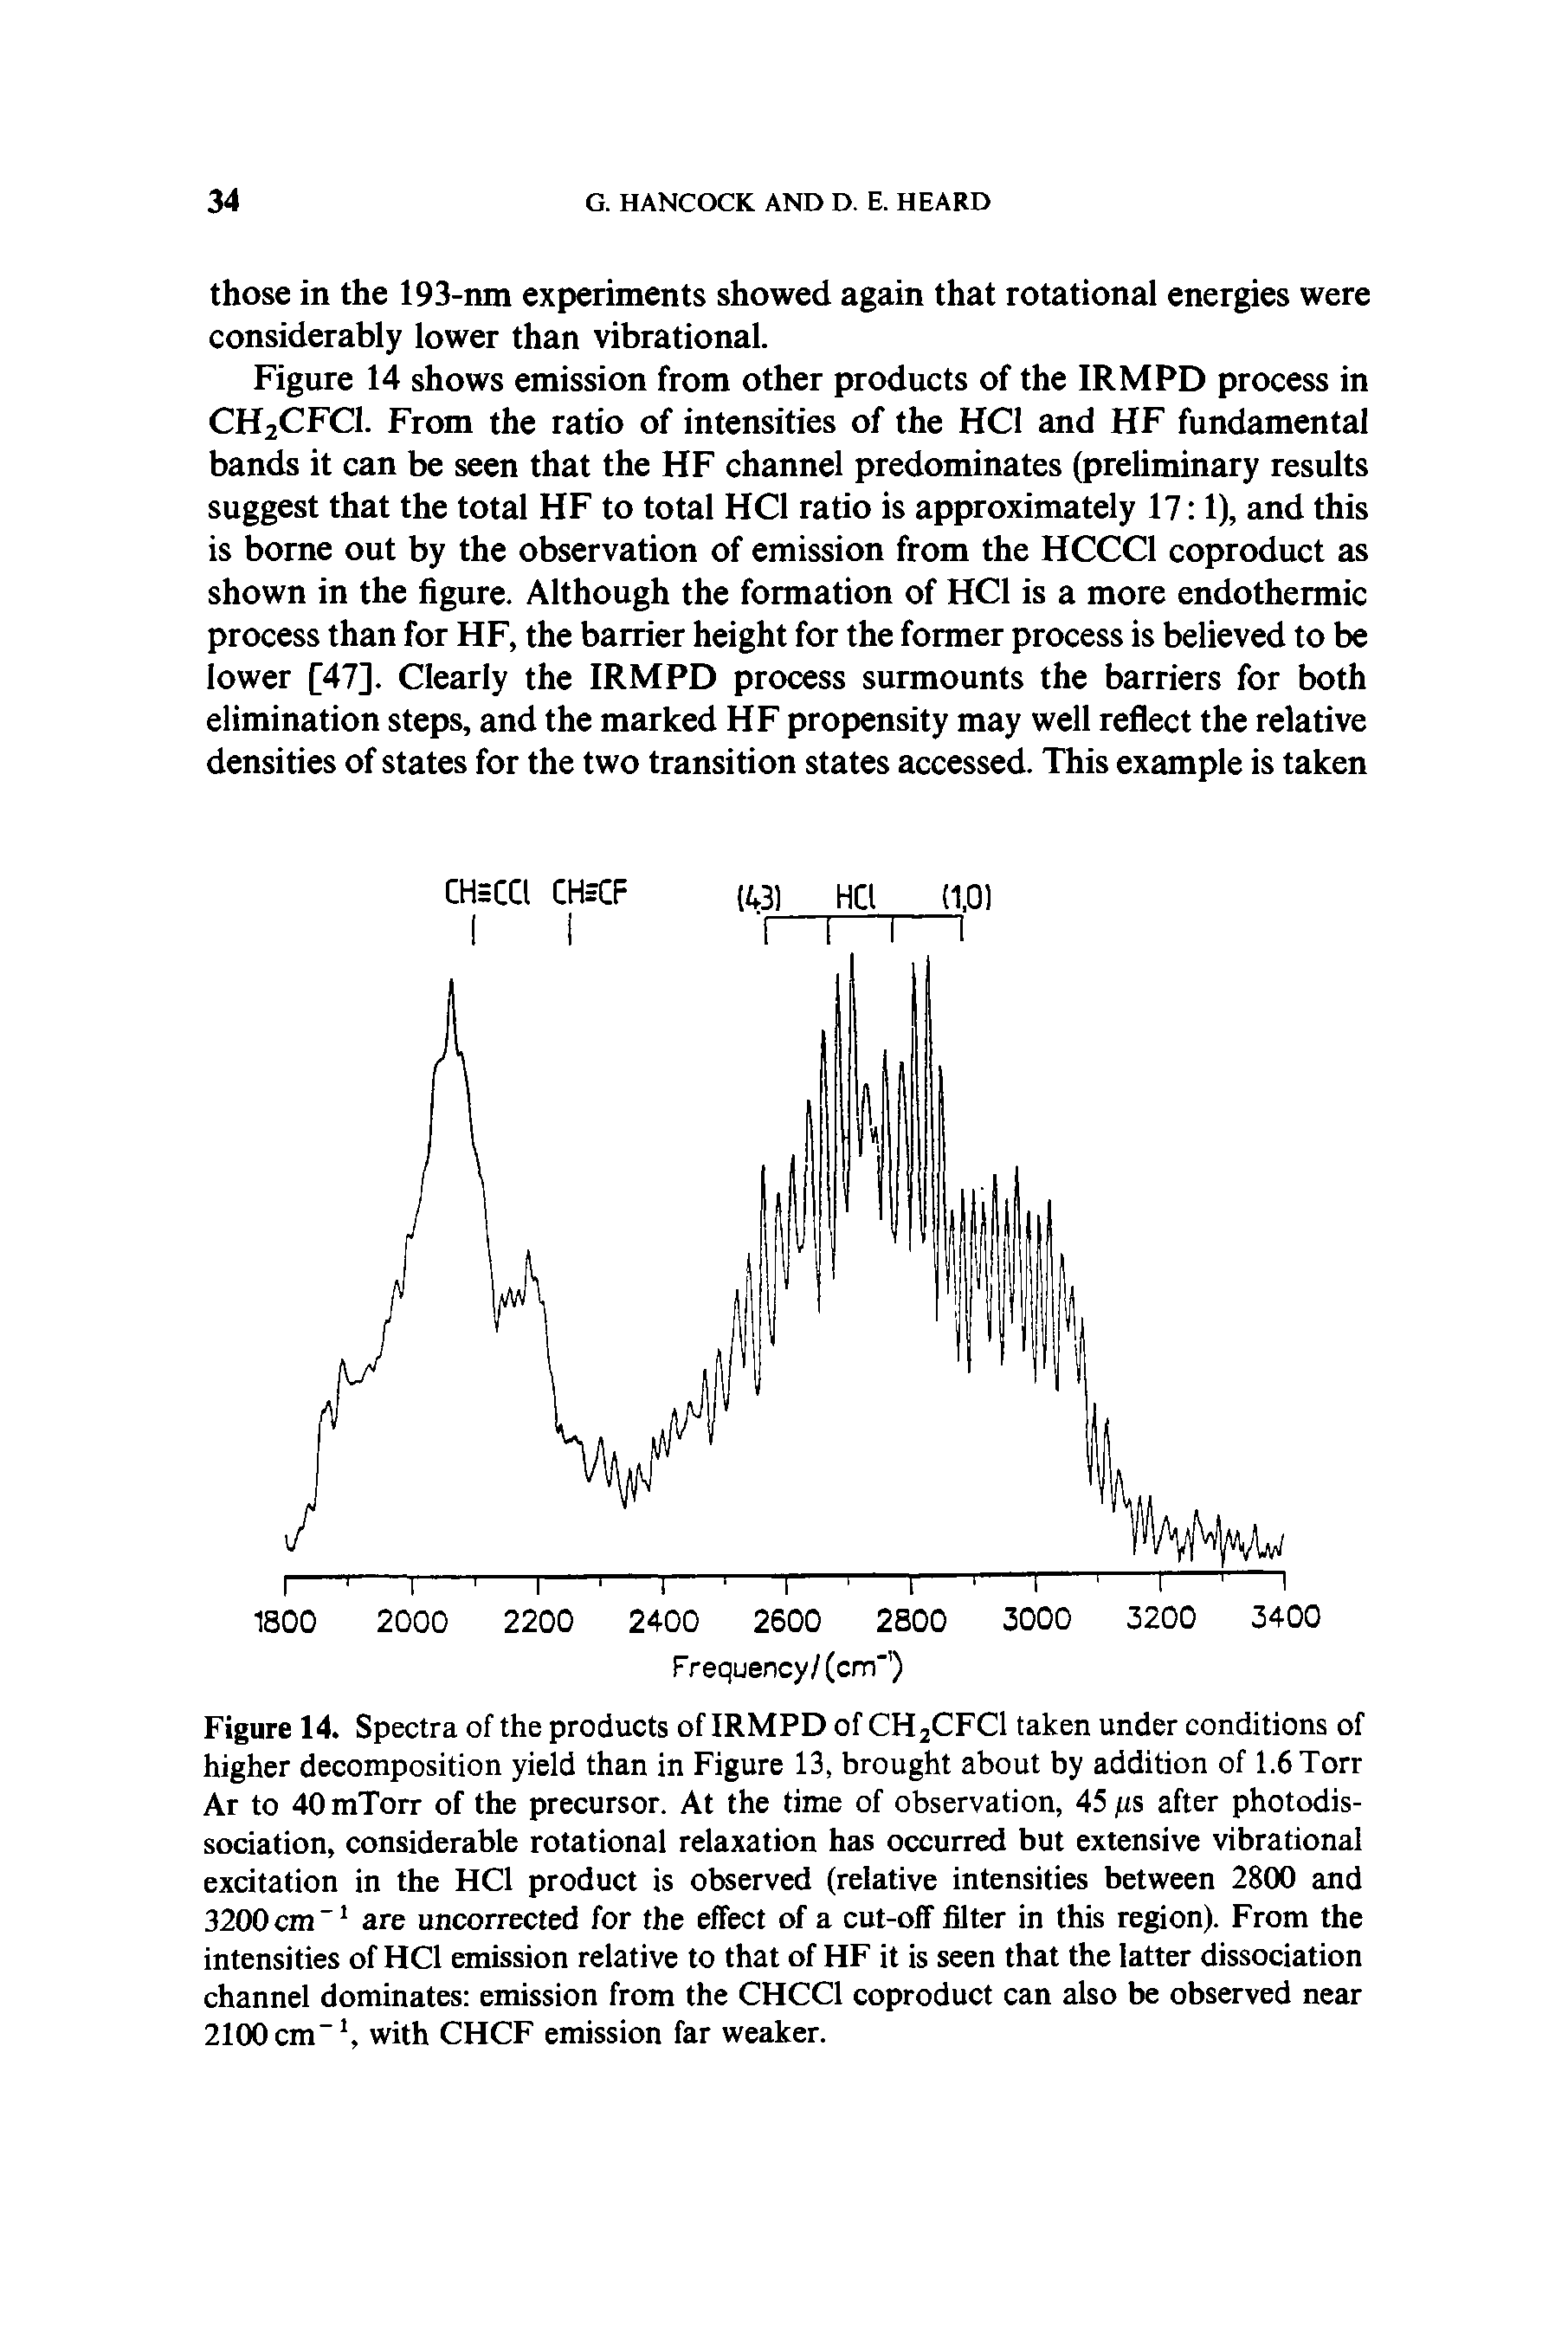 Figure 14. Spectra of the products of IRMPD of CH2CFC1 taken under conditions of higher decomposition yield than in Figure 13, brought about by addition of 1.6Torr Ar to 40mTorr of the precursor. At the time of observation, 45 <s after photodissociation, considerable rotational relaxation has occurred but extensive vibrational excitation in the HC1 product is observed (relative intensities between 2800 and 3200 cm 1 are uncorrected for the effect of a cut-off filter in this region). From the intensities of HC1 emission relative to that of HF it is seen that the latter dissociation channel dominates emission from the CHCC1 coproduct can also be observed near 2100 cm-1, with CHCF emission far weaker.